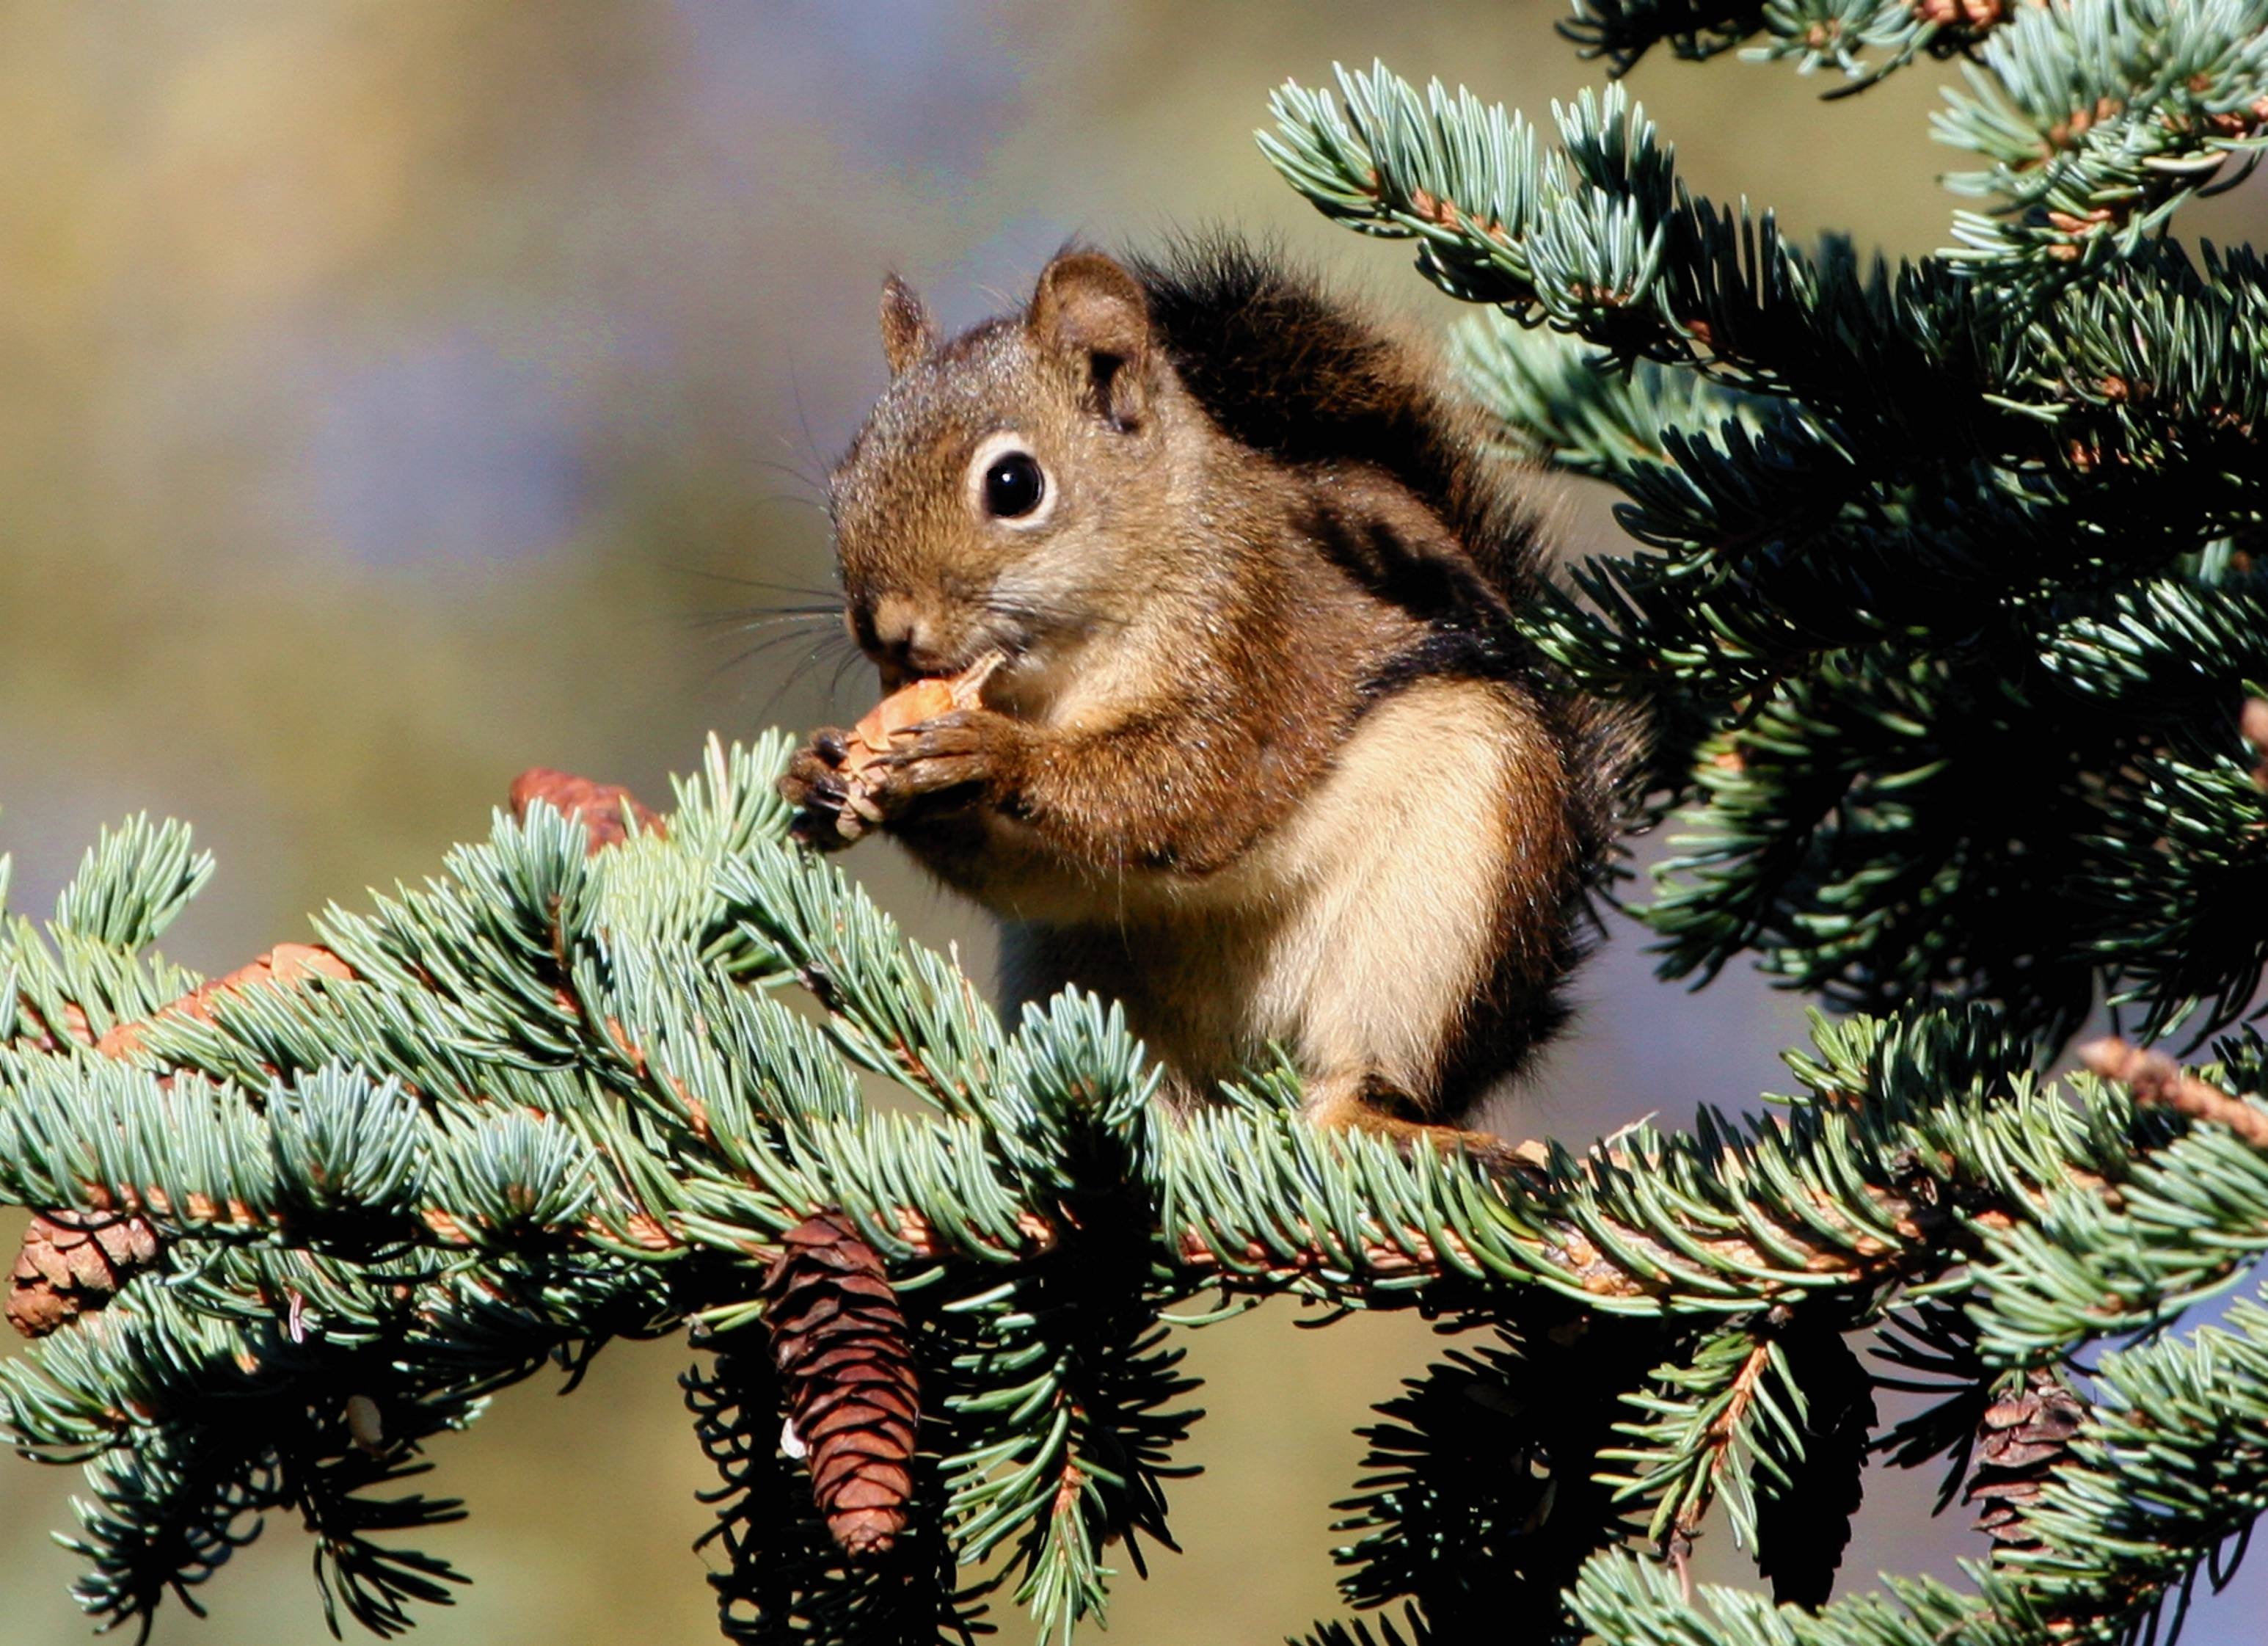 Nutcrackers and Squirrels, Farmers of the Forests - Wild About Utah